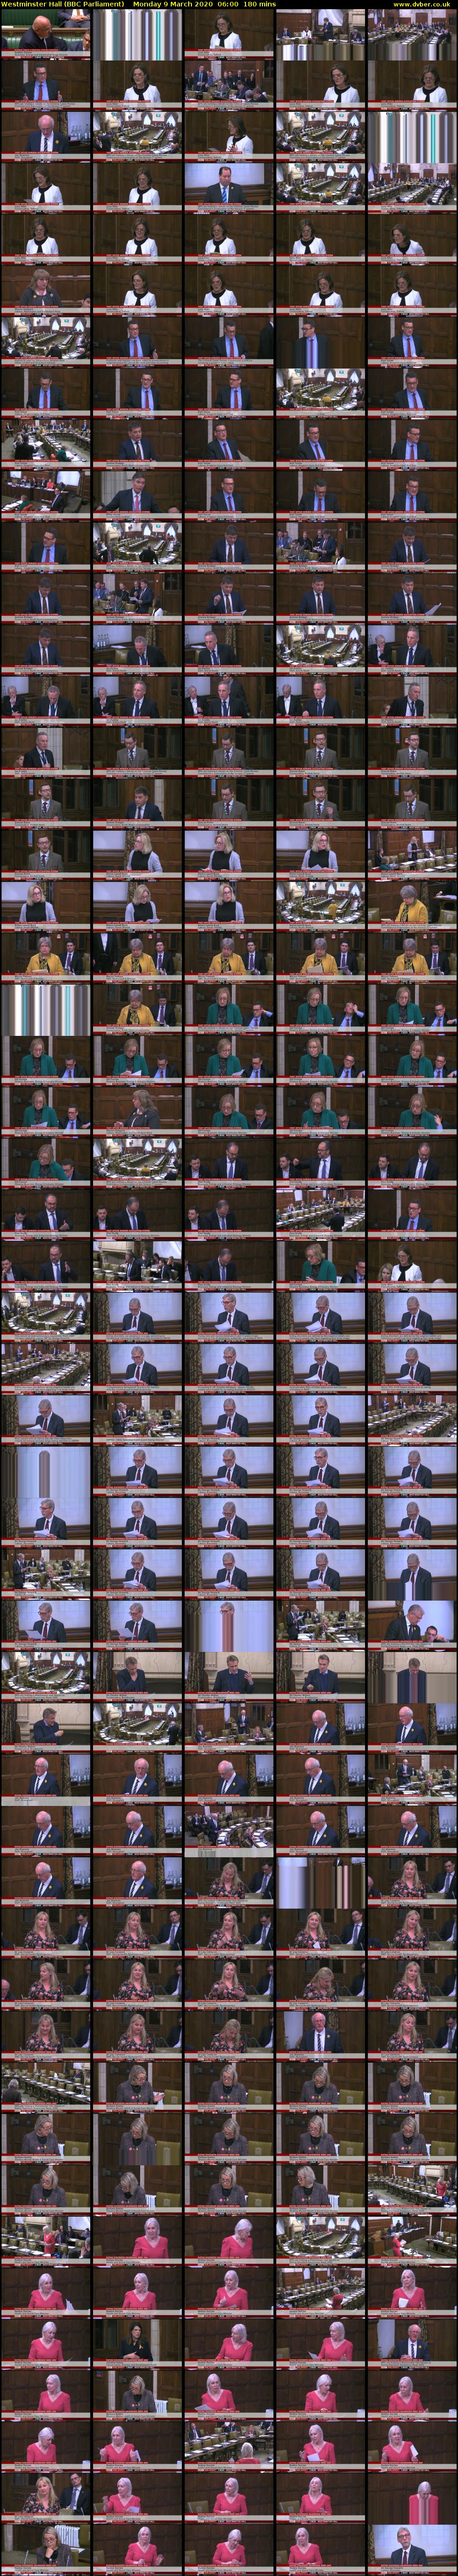 Westminster Hall (BBC Parliament) Monday 9 March 2020 06:00 - 09:00